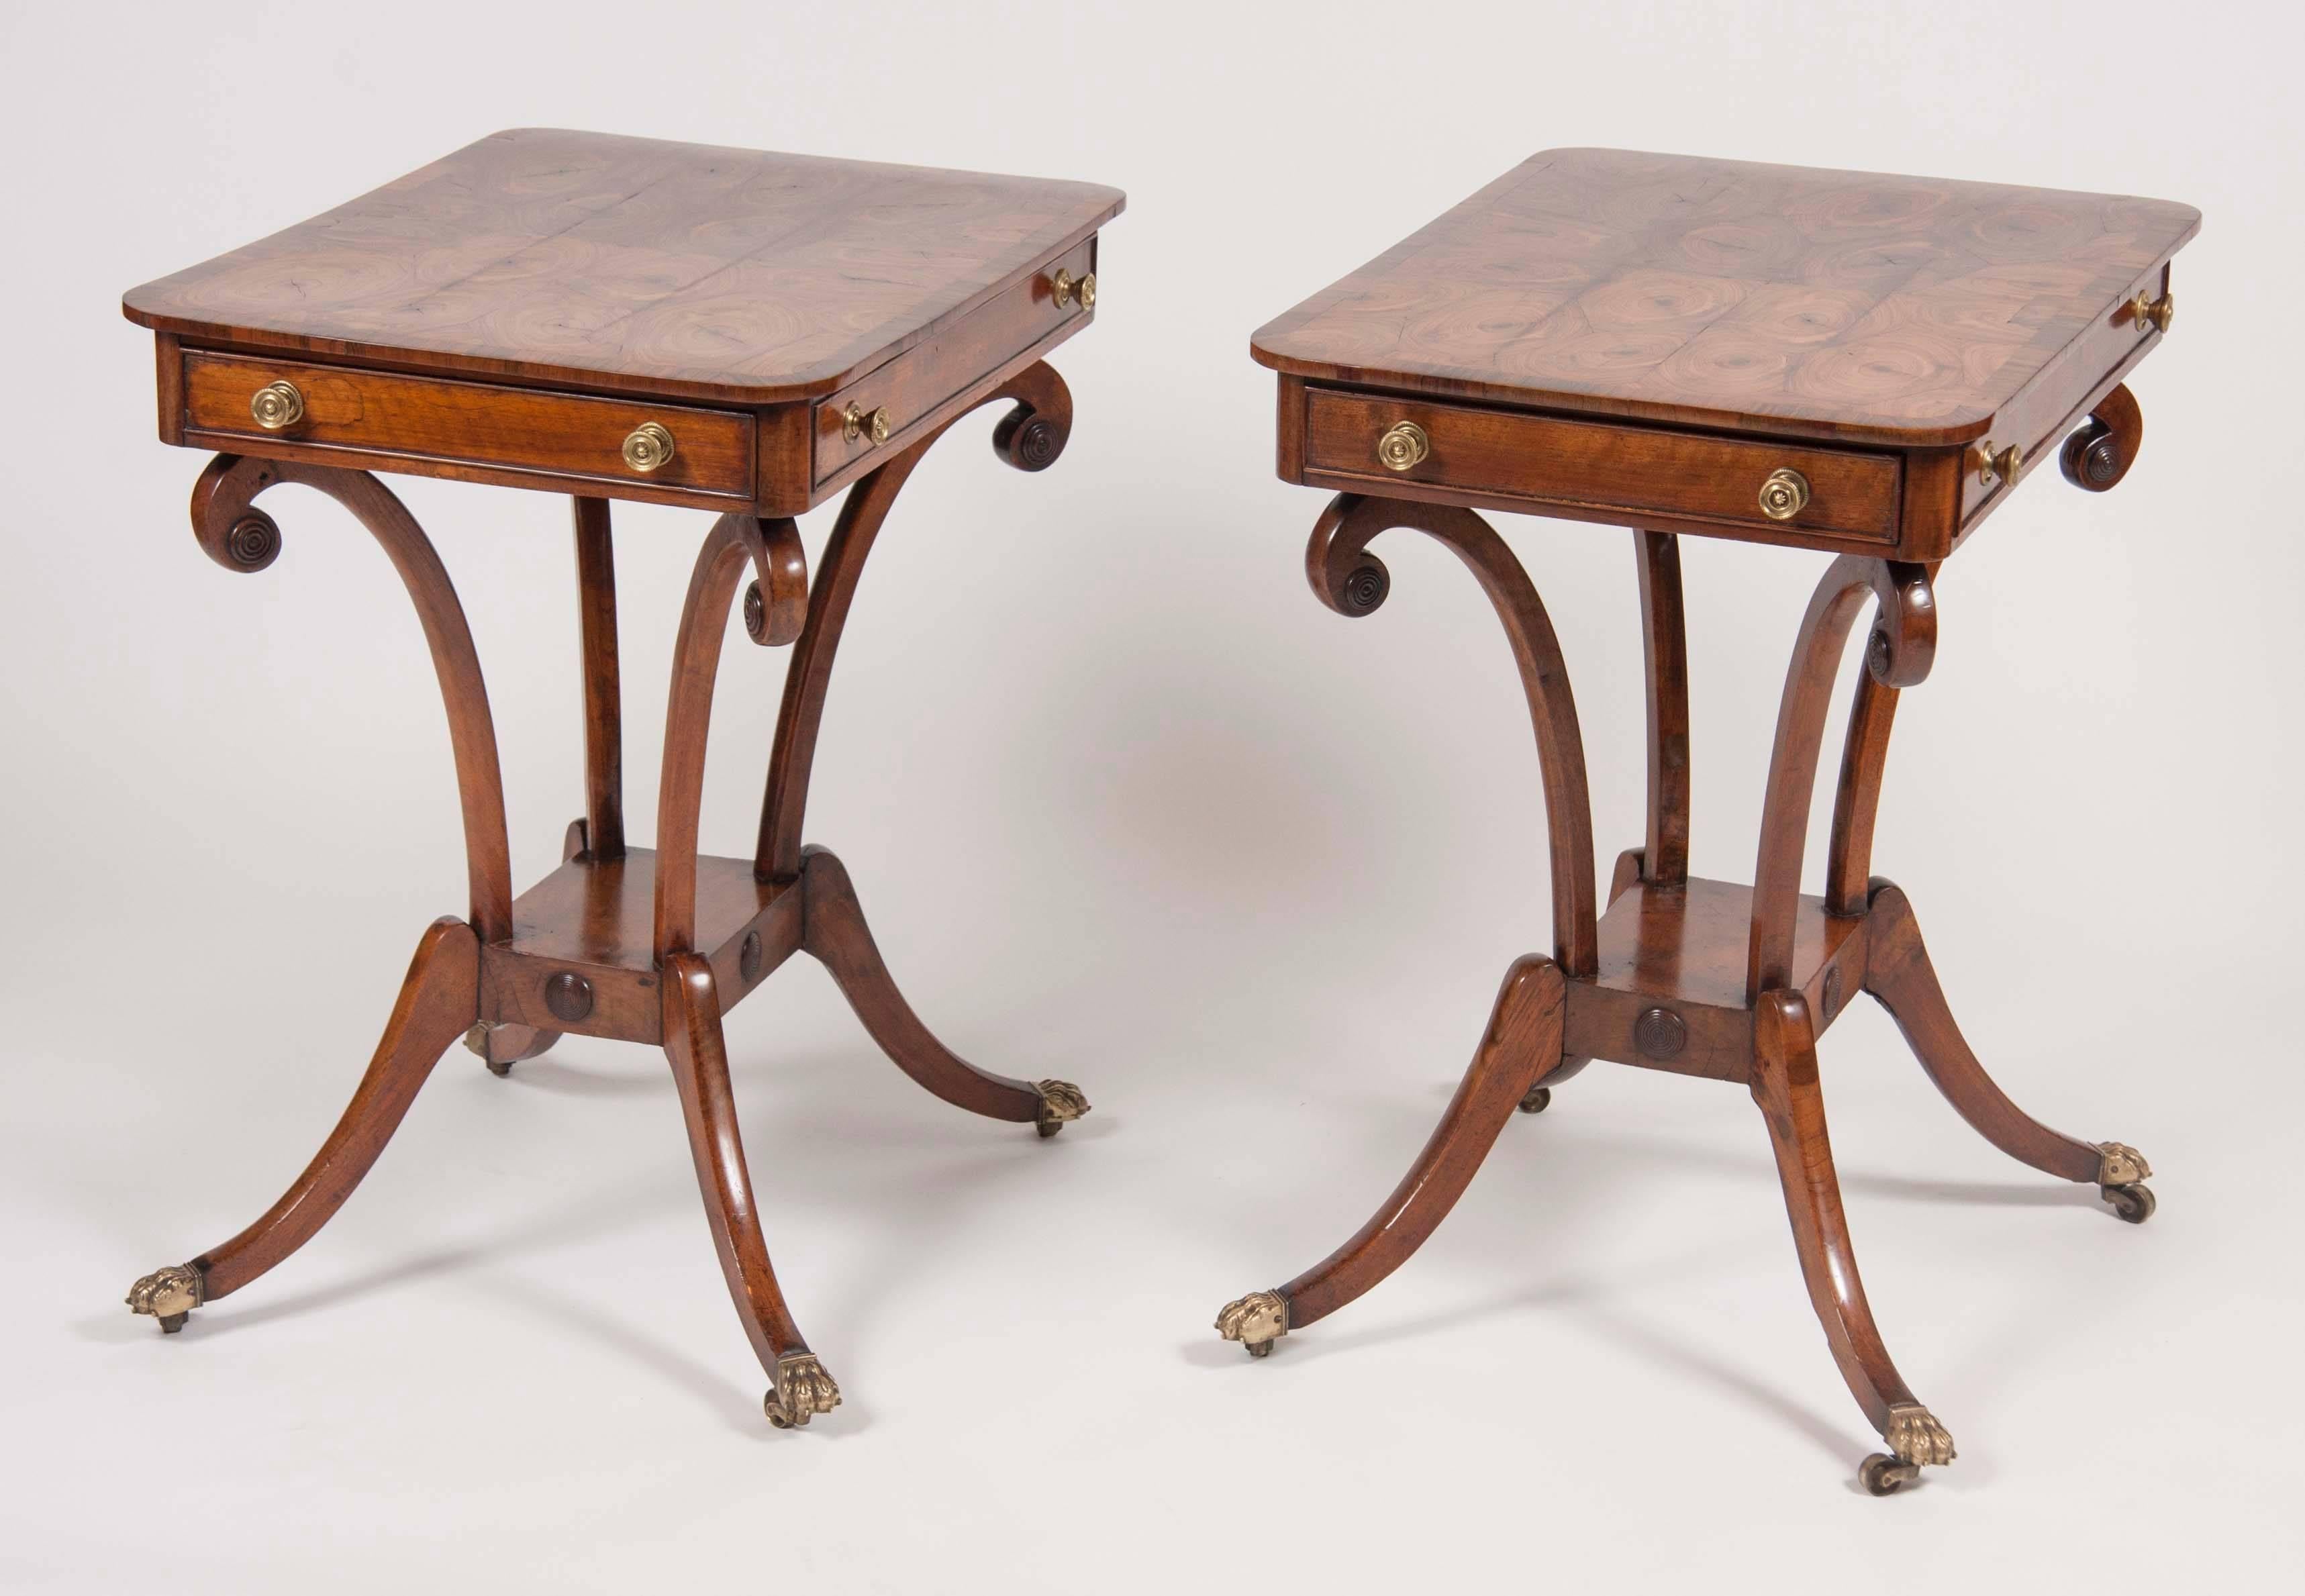 Early 19th Century Pair of Regency Oyster Veneer and Mahogany End Tables